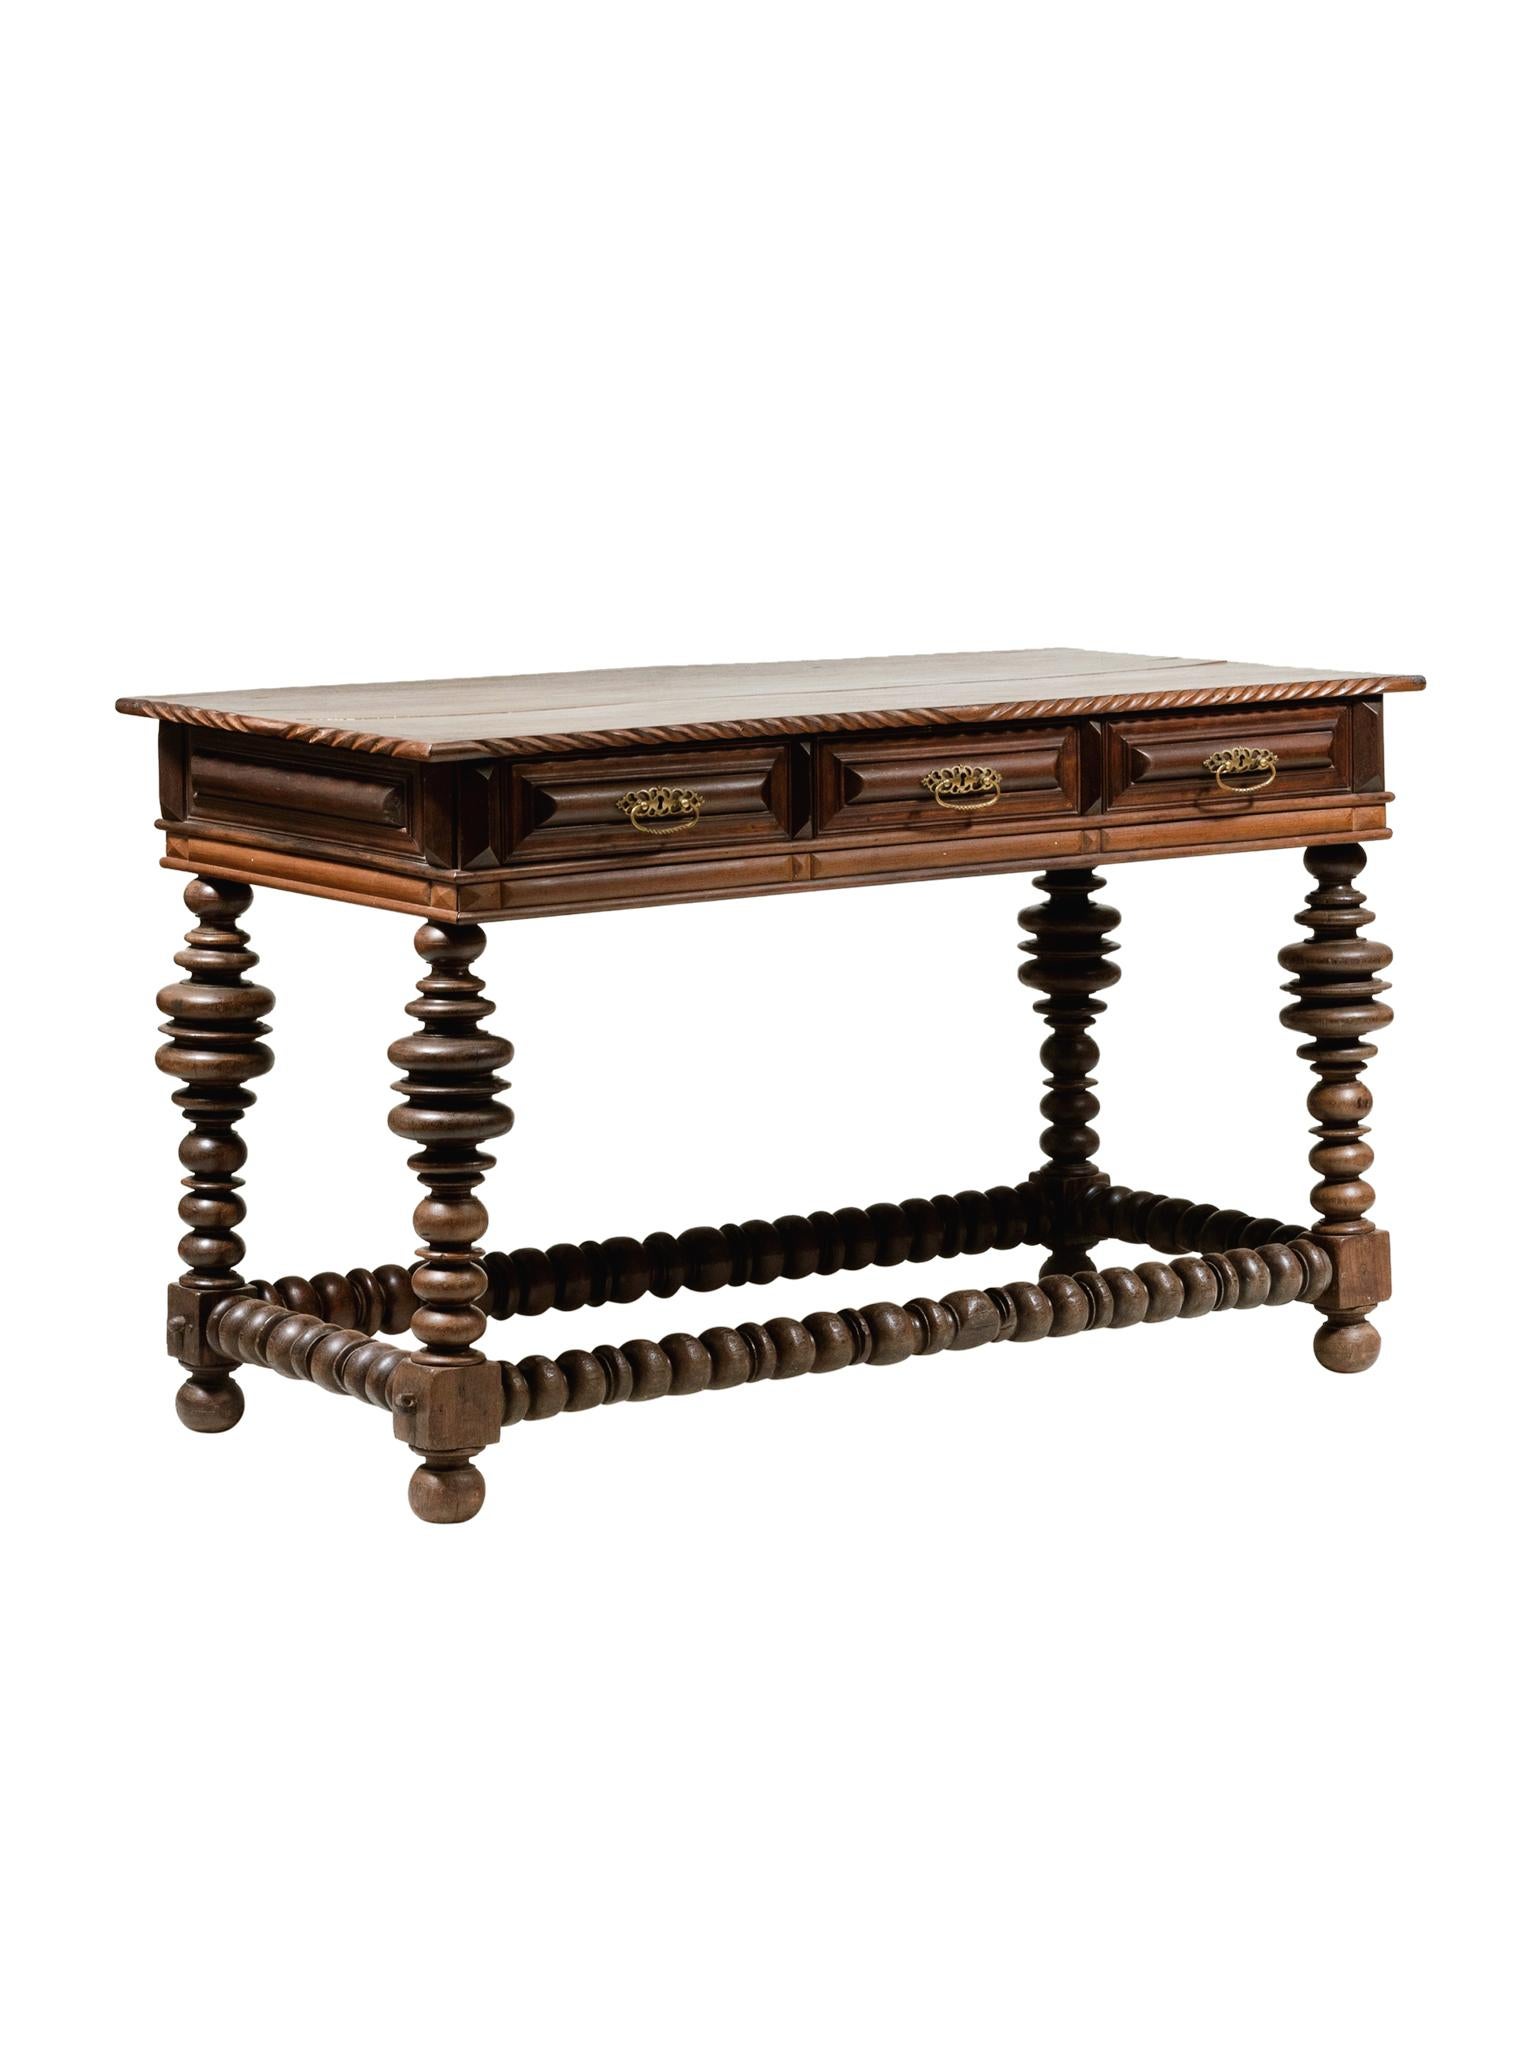 This Baroque-style Portuguese table was constructed in the 20th century. It is a marriage of antique parts. Overall the table is comprised of rosewood with a beautiful, warm tone. There are 3 drawer compartments with brass pulls. An outstanding